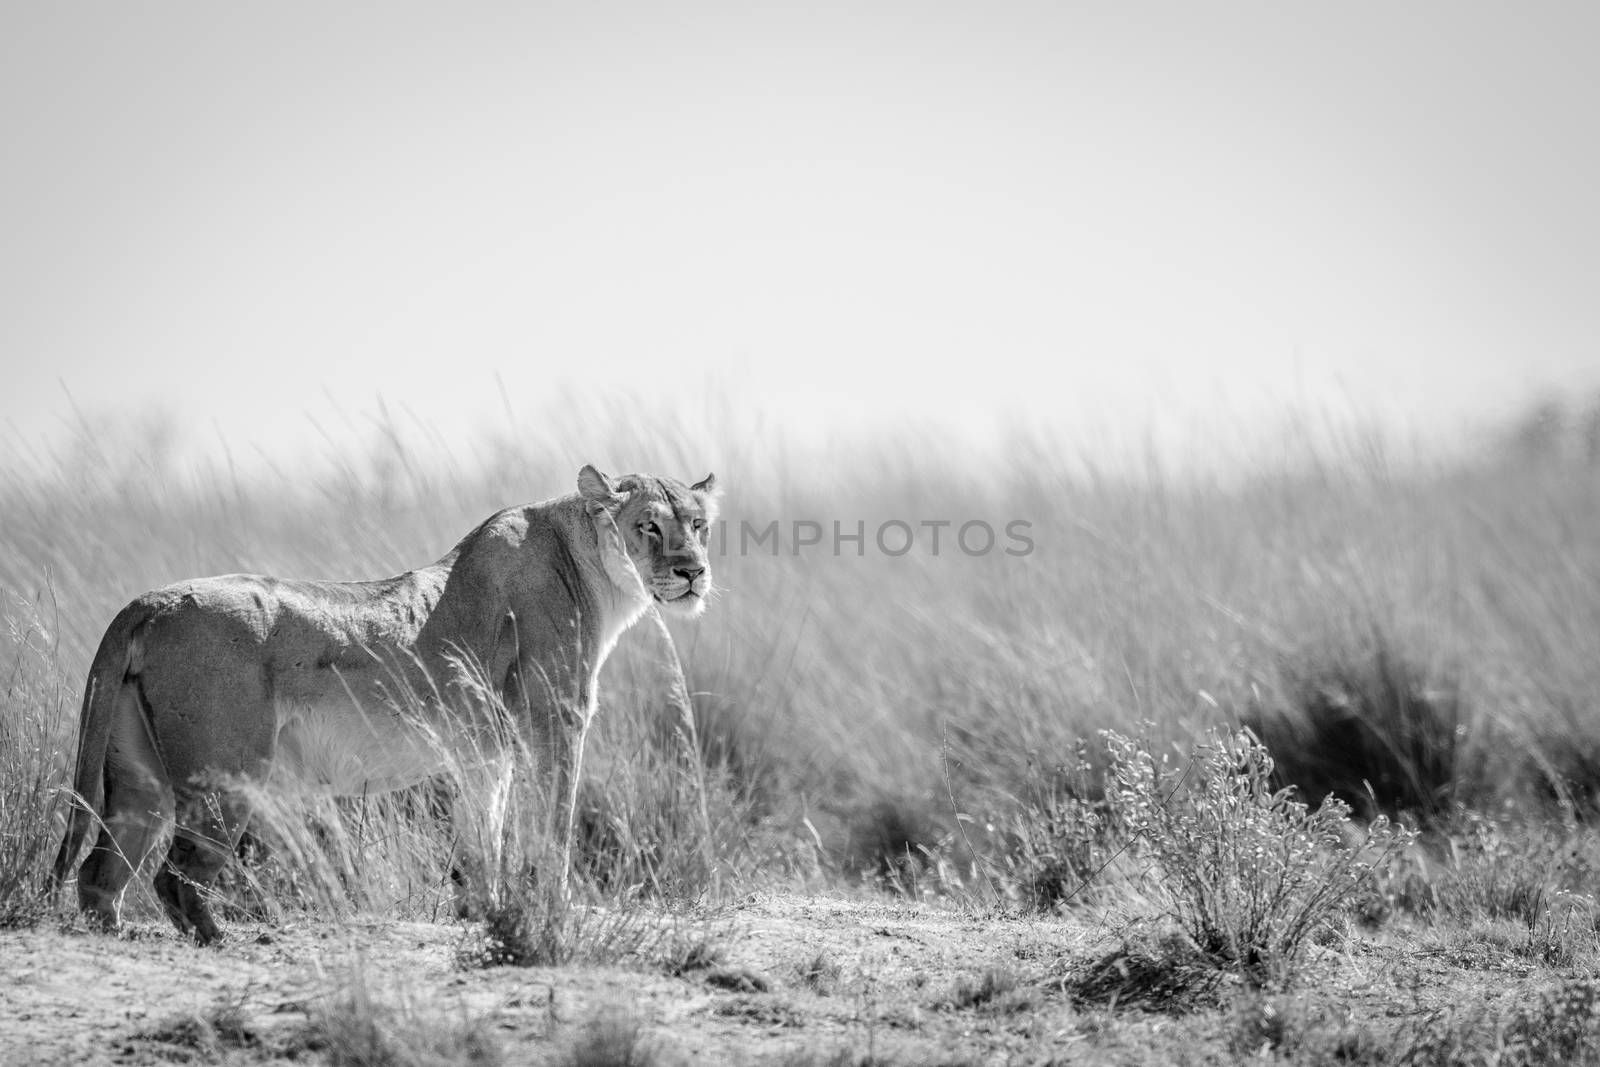 Lioness standing in the grass and scanning the surroundings in the Welgevonden game reserve, South Africa.